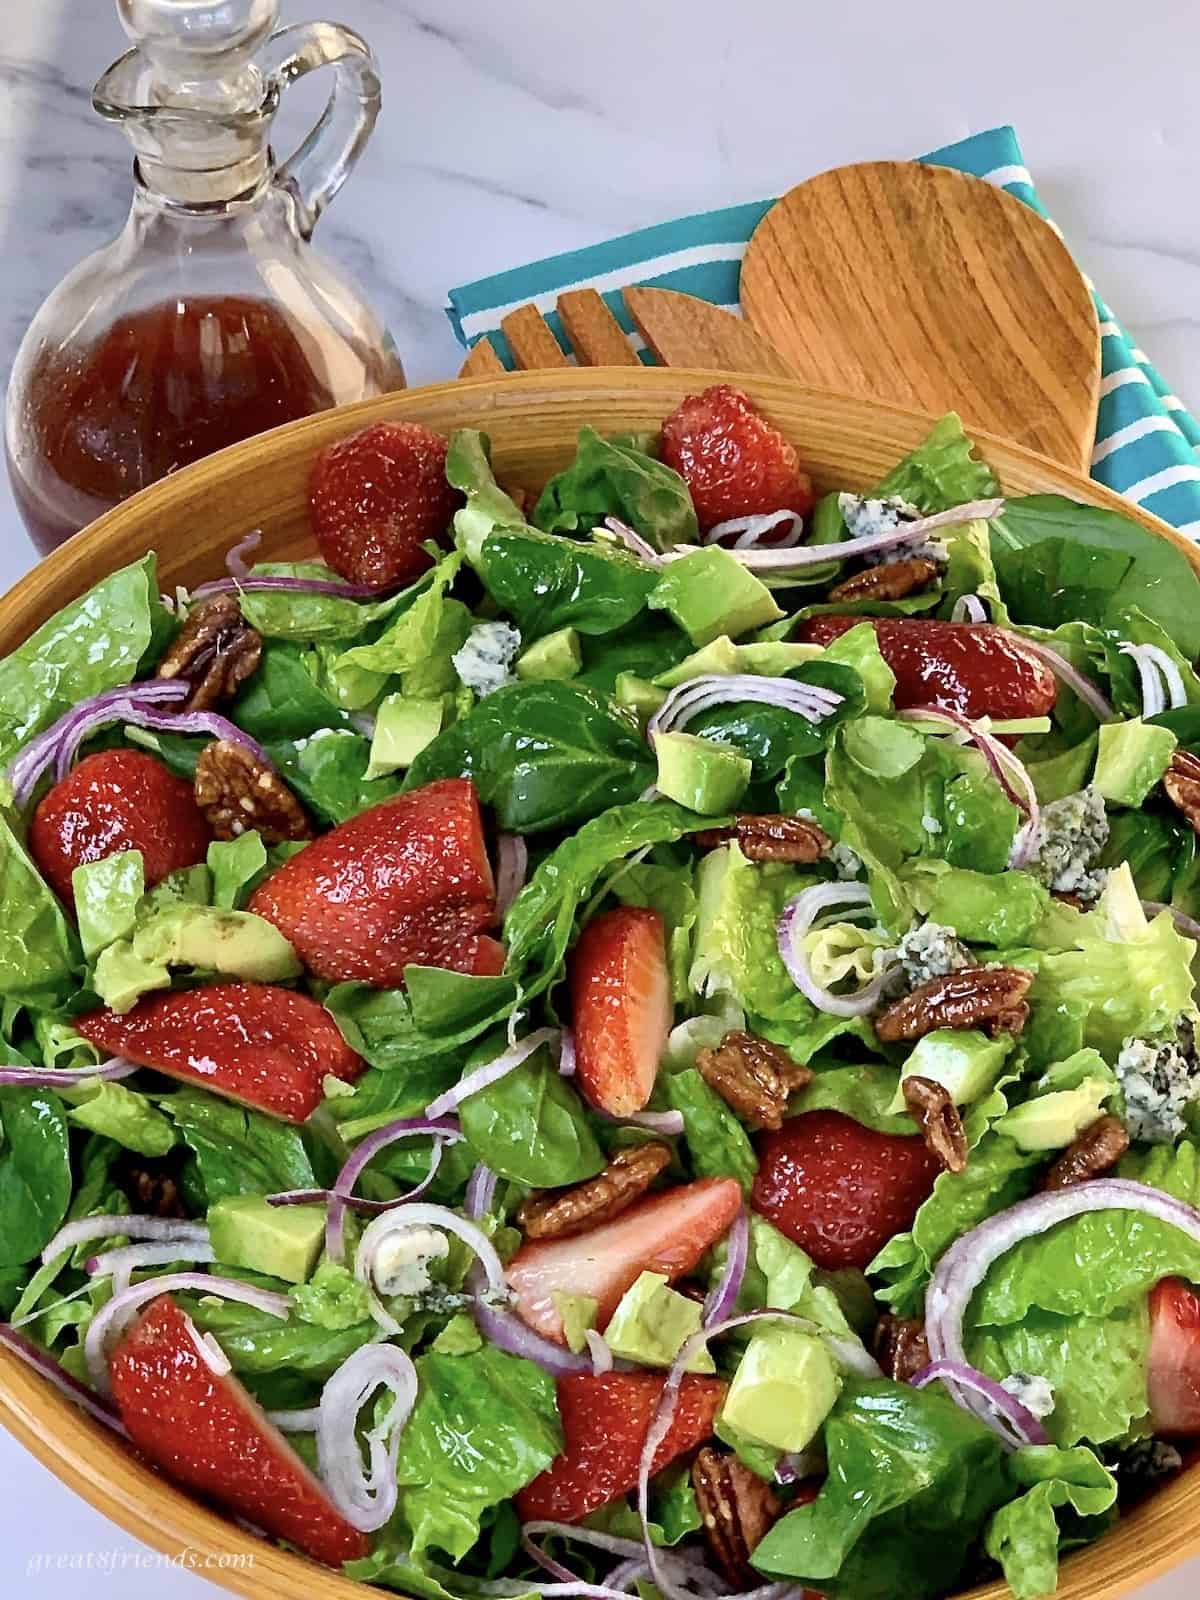 A salad with strawberries, pecans, sliced red onions, avocado and lettuce with a cruet of red dressing.